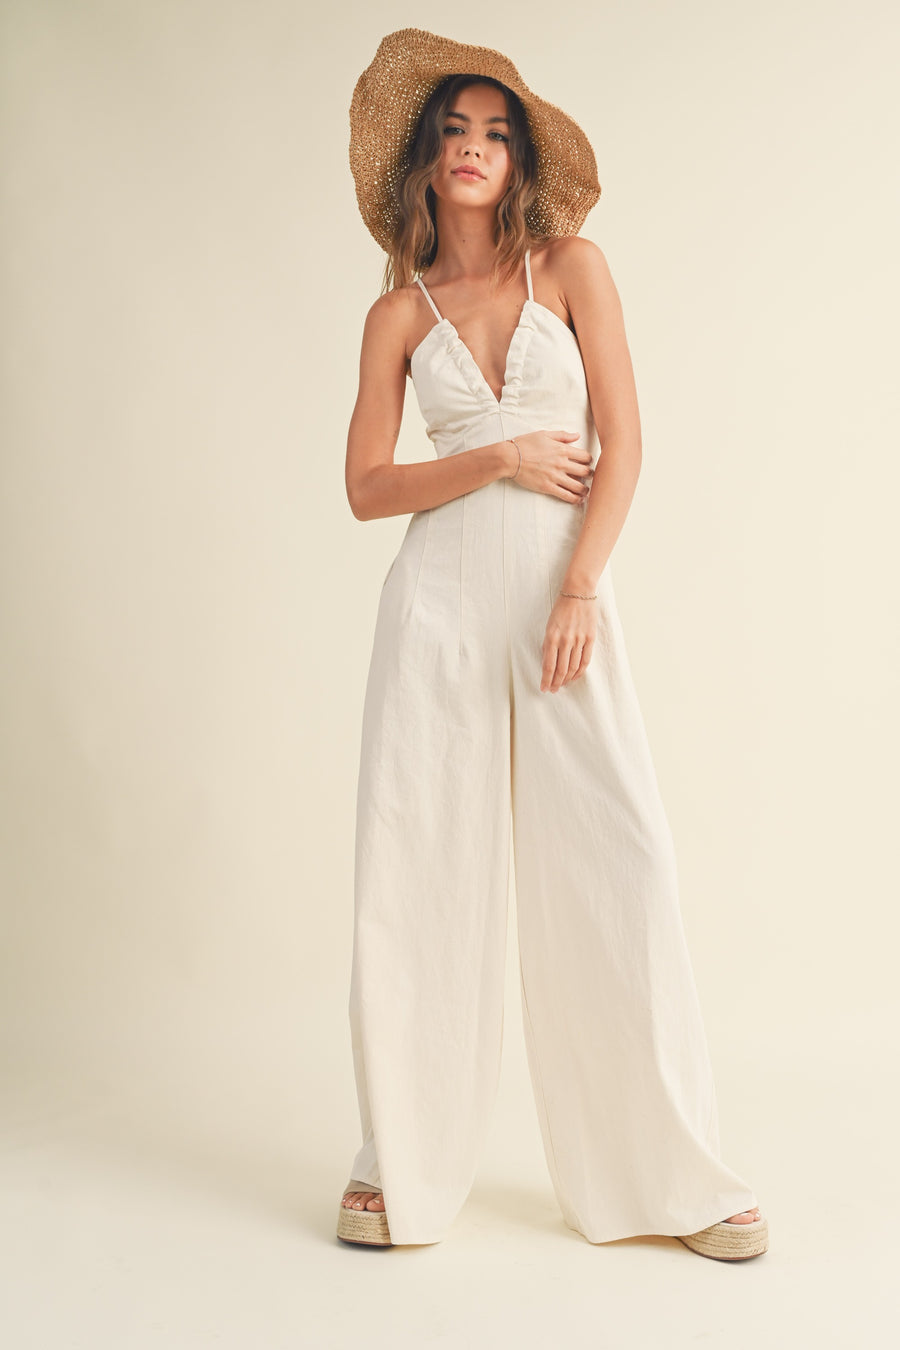 Featuring an open back V-neck Jumpsuit with a wide leg and pockets on each side in the color ecru